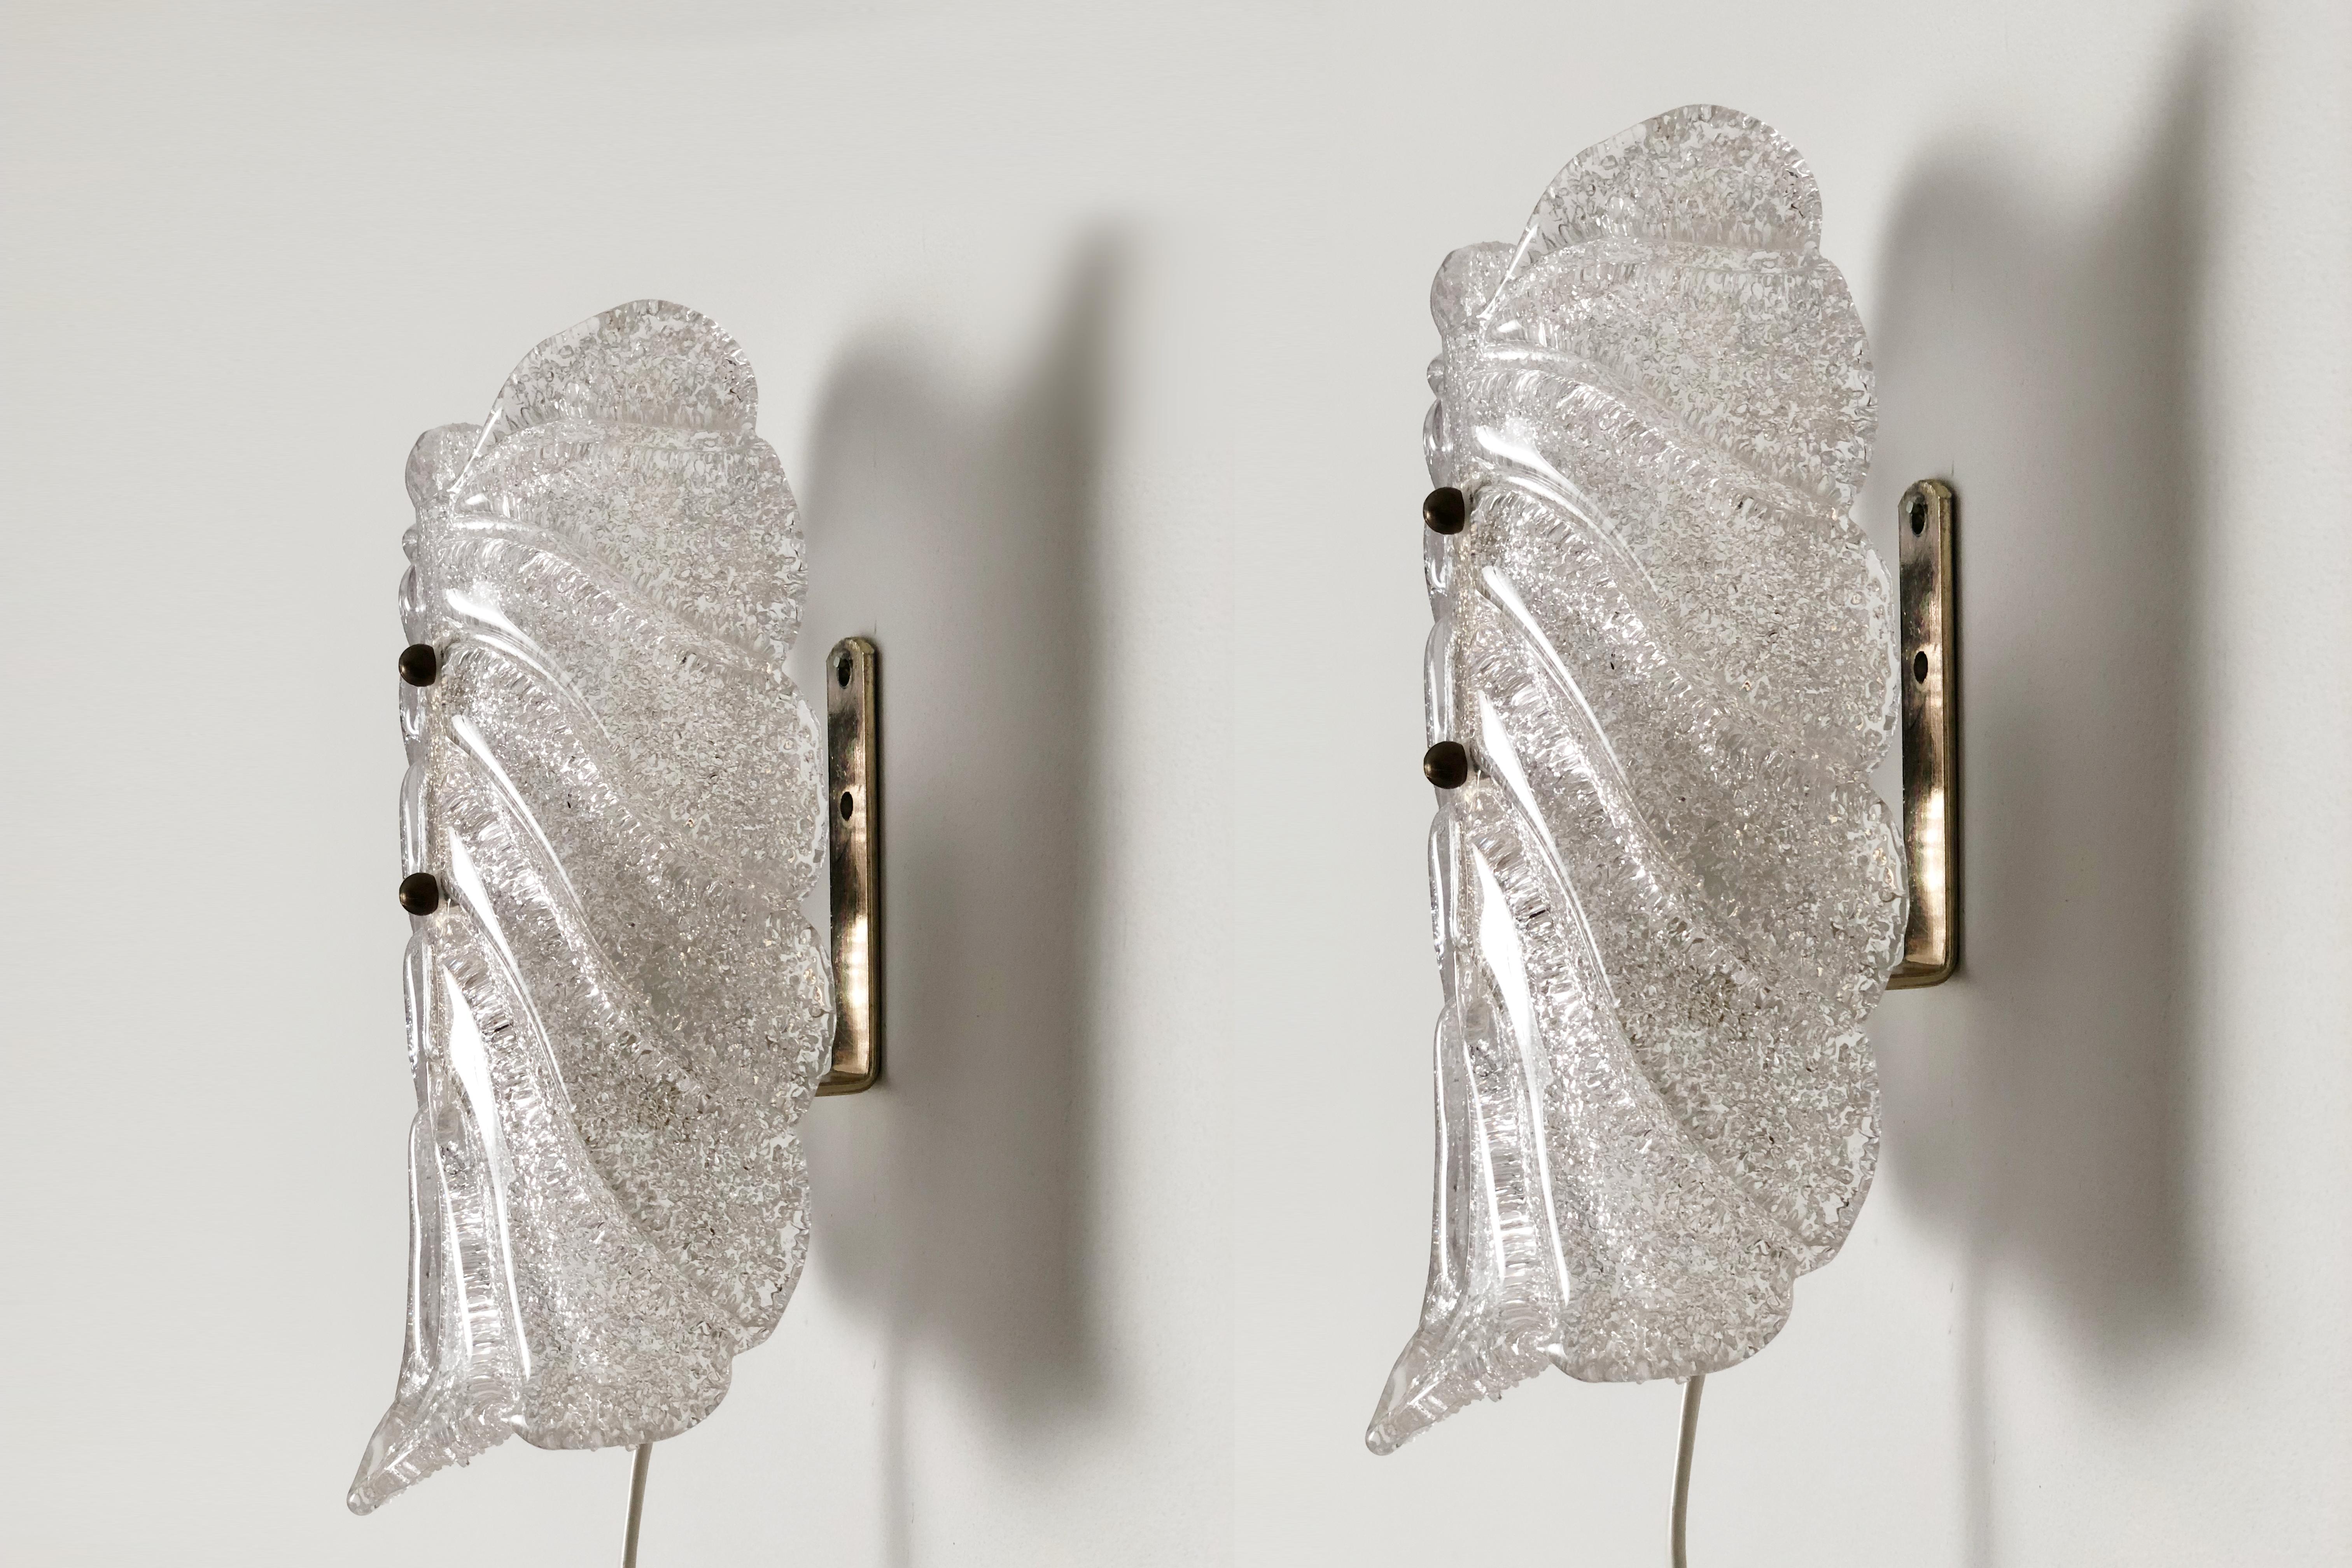 Offered for your consideration is a pair of 1960’s leaf shaped glass sconces in clear 'Patte de Verre' moulded glass. Each glass shade decorated on the back with semi-molten granulated glass fused to the shades while still molten, achieving the